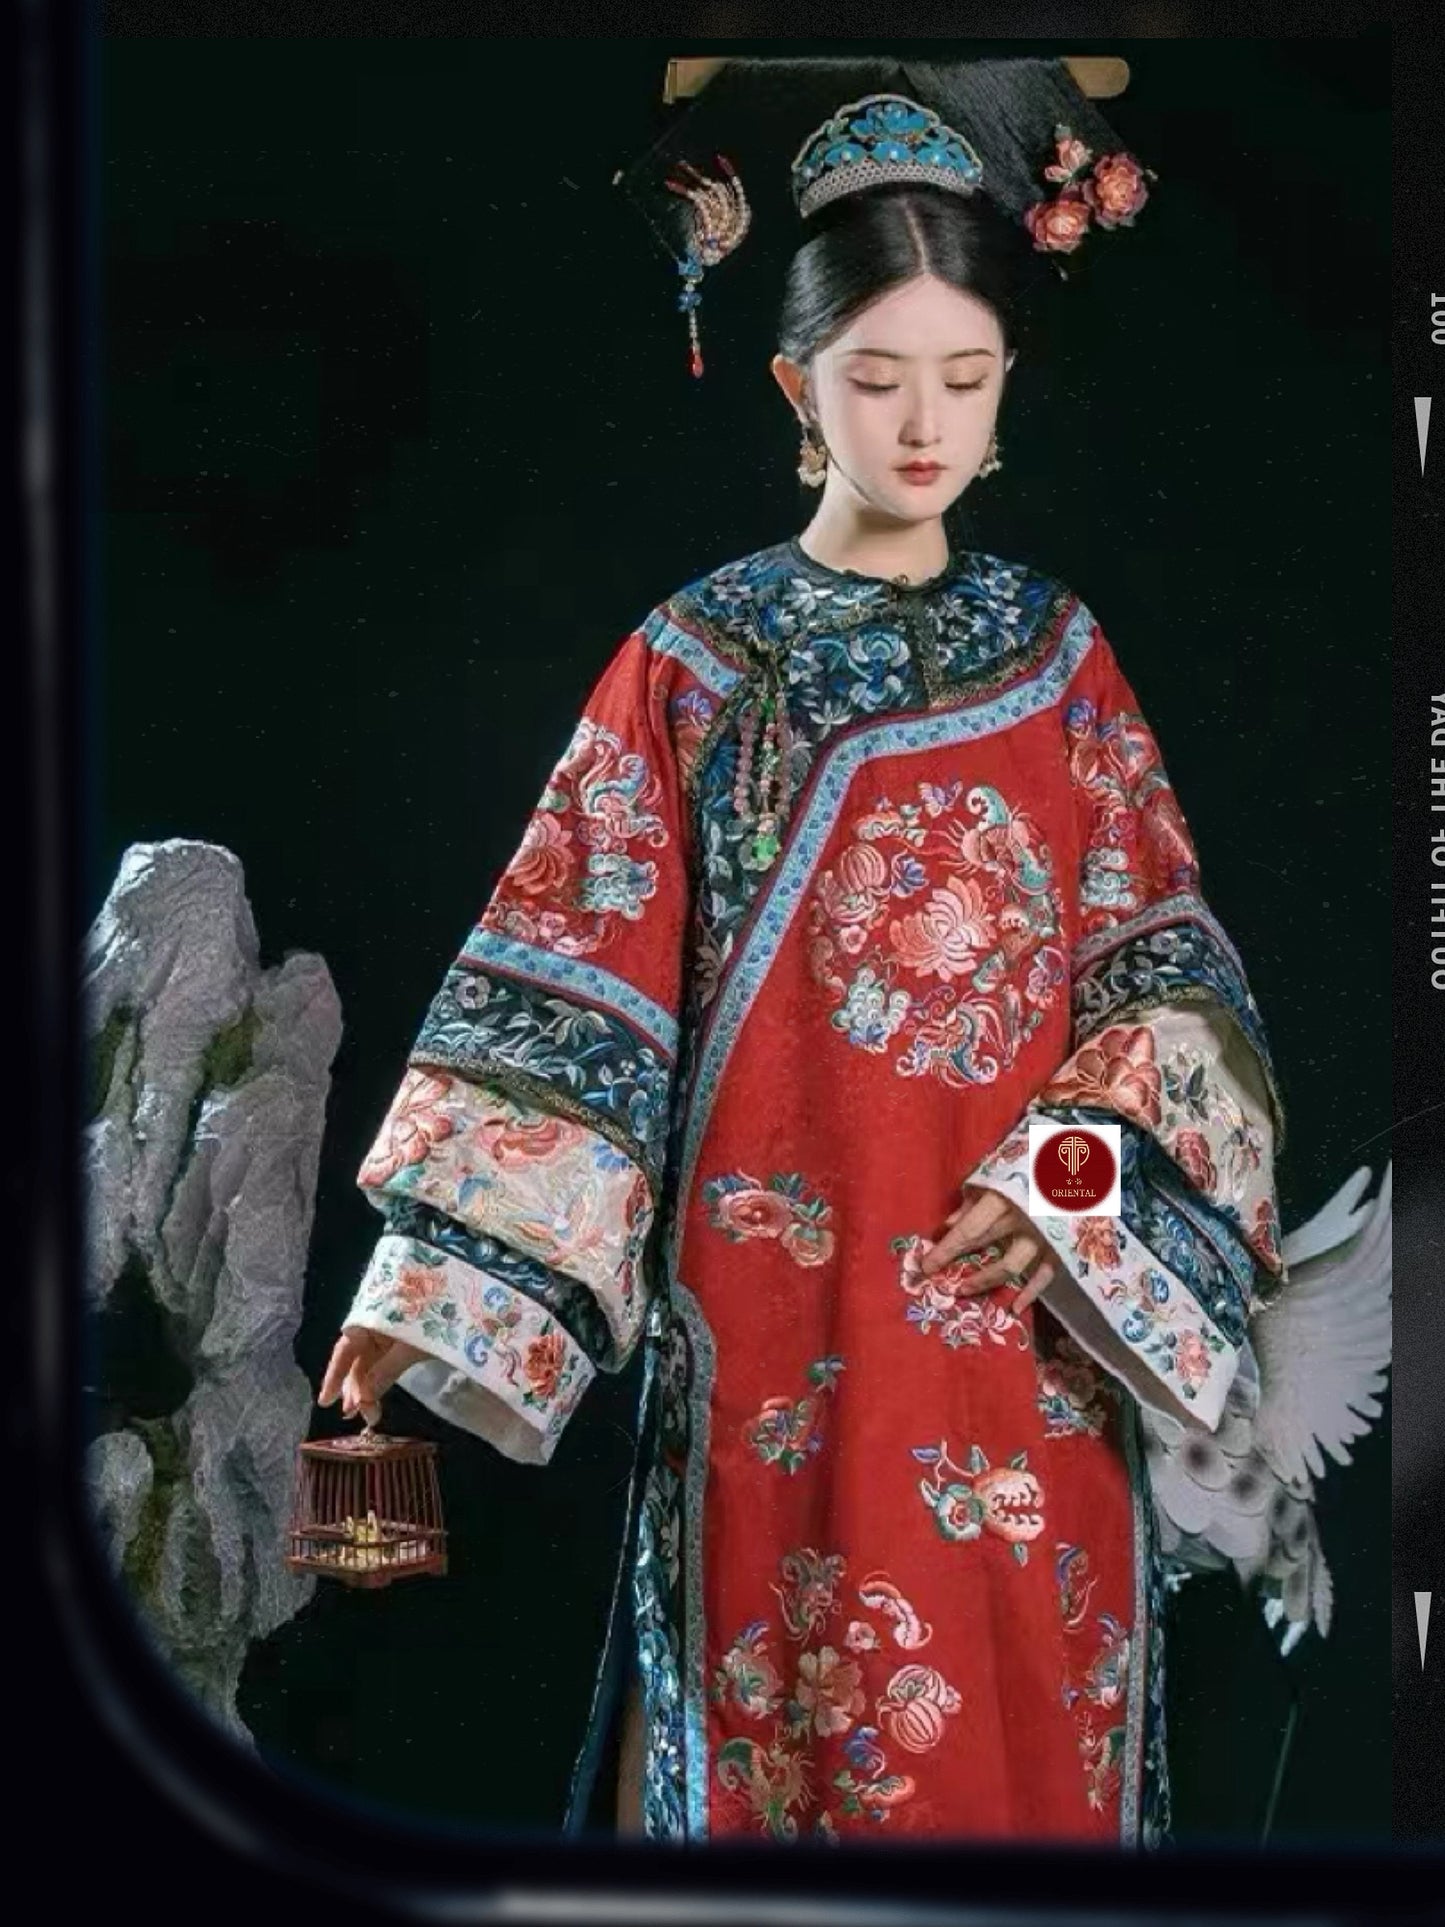 Rent-Imperial Elegance: Qing Dynasty-Inspired Hanfu Dress - Traditional Print & Courtly Grace